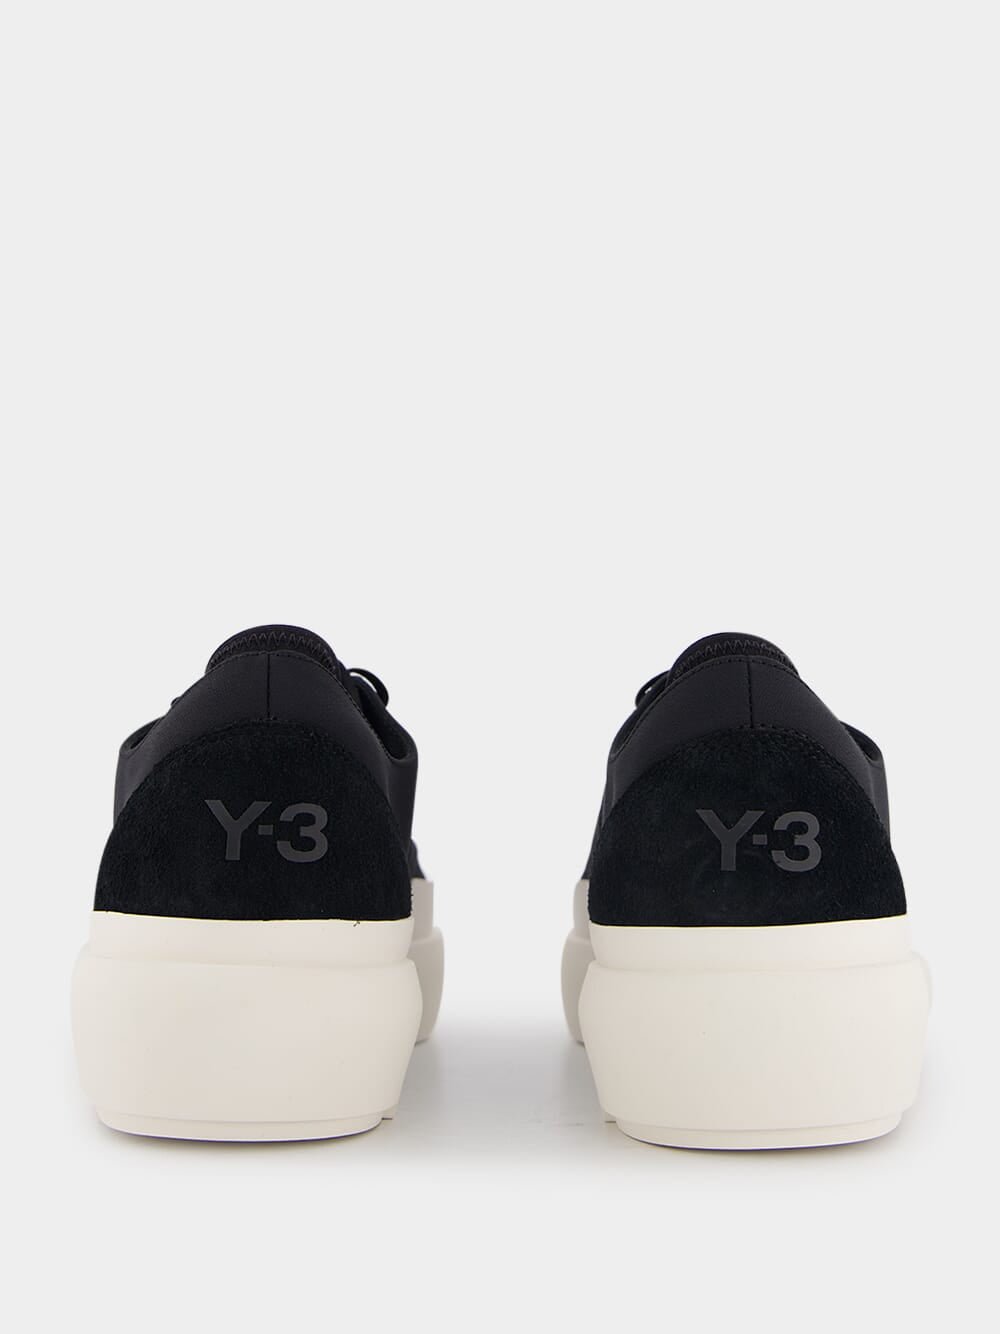 Y-3Ajatu Court Low-Top Sneakers at Fashion Clinic